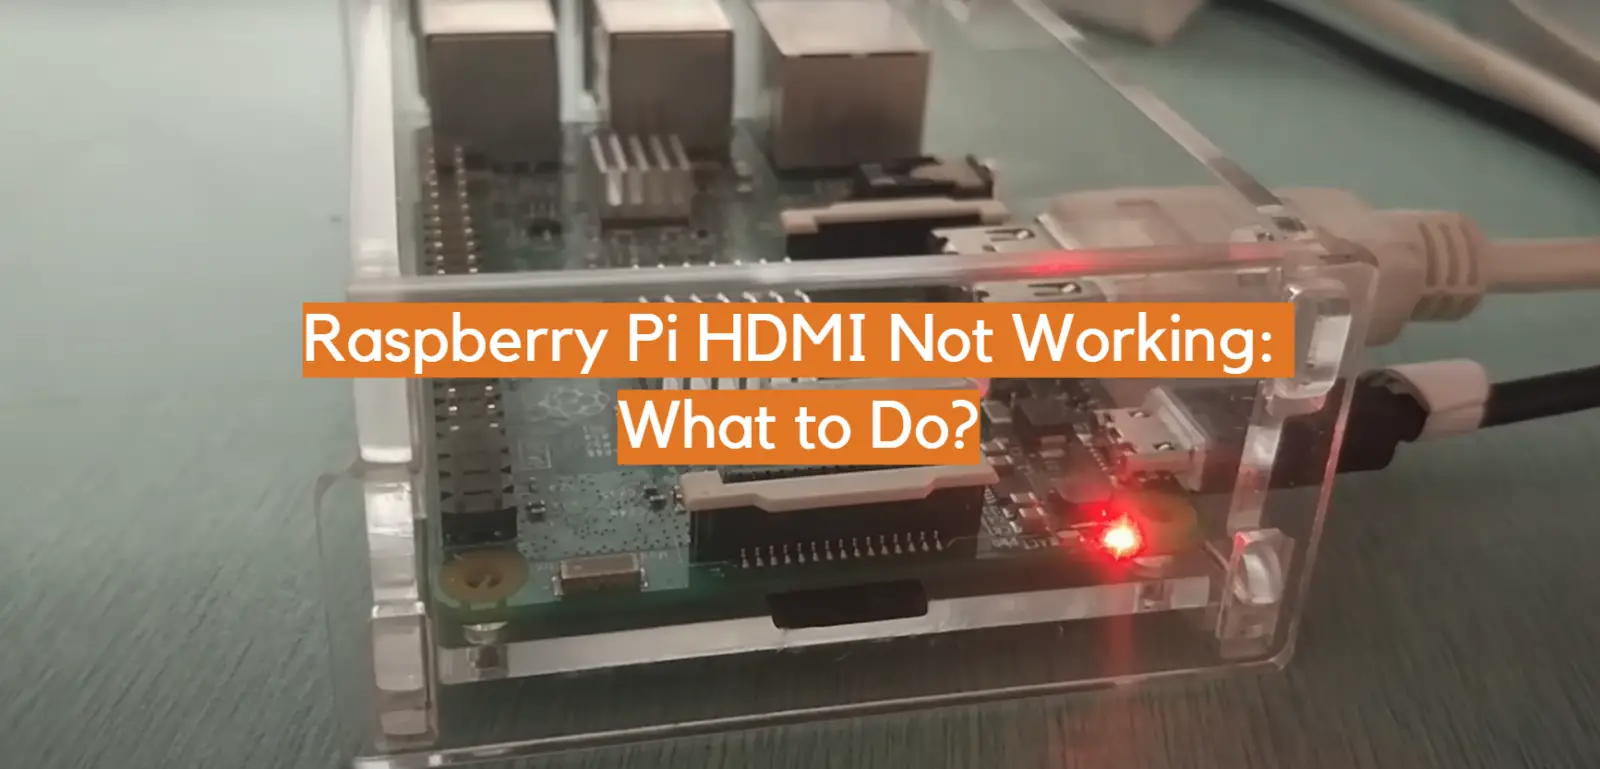 Raspberry Pi HDMI Not Working: What to Do?